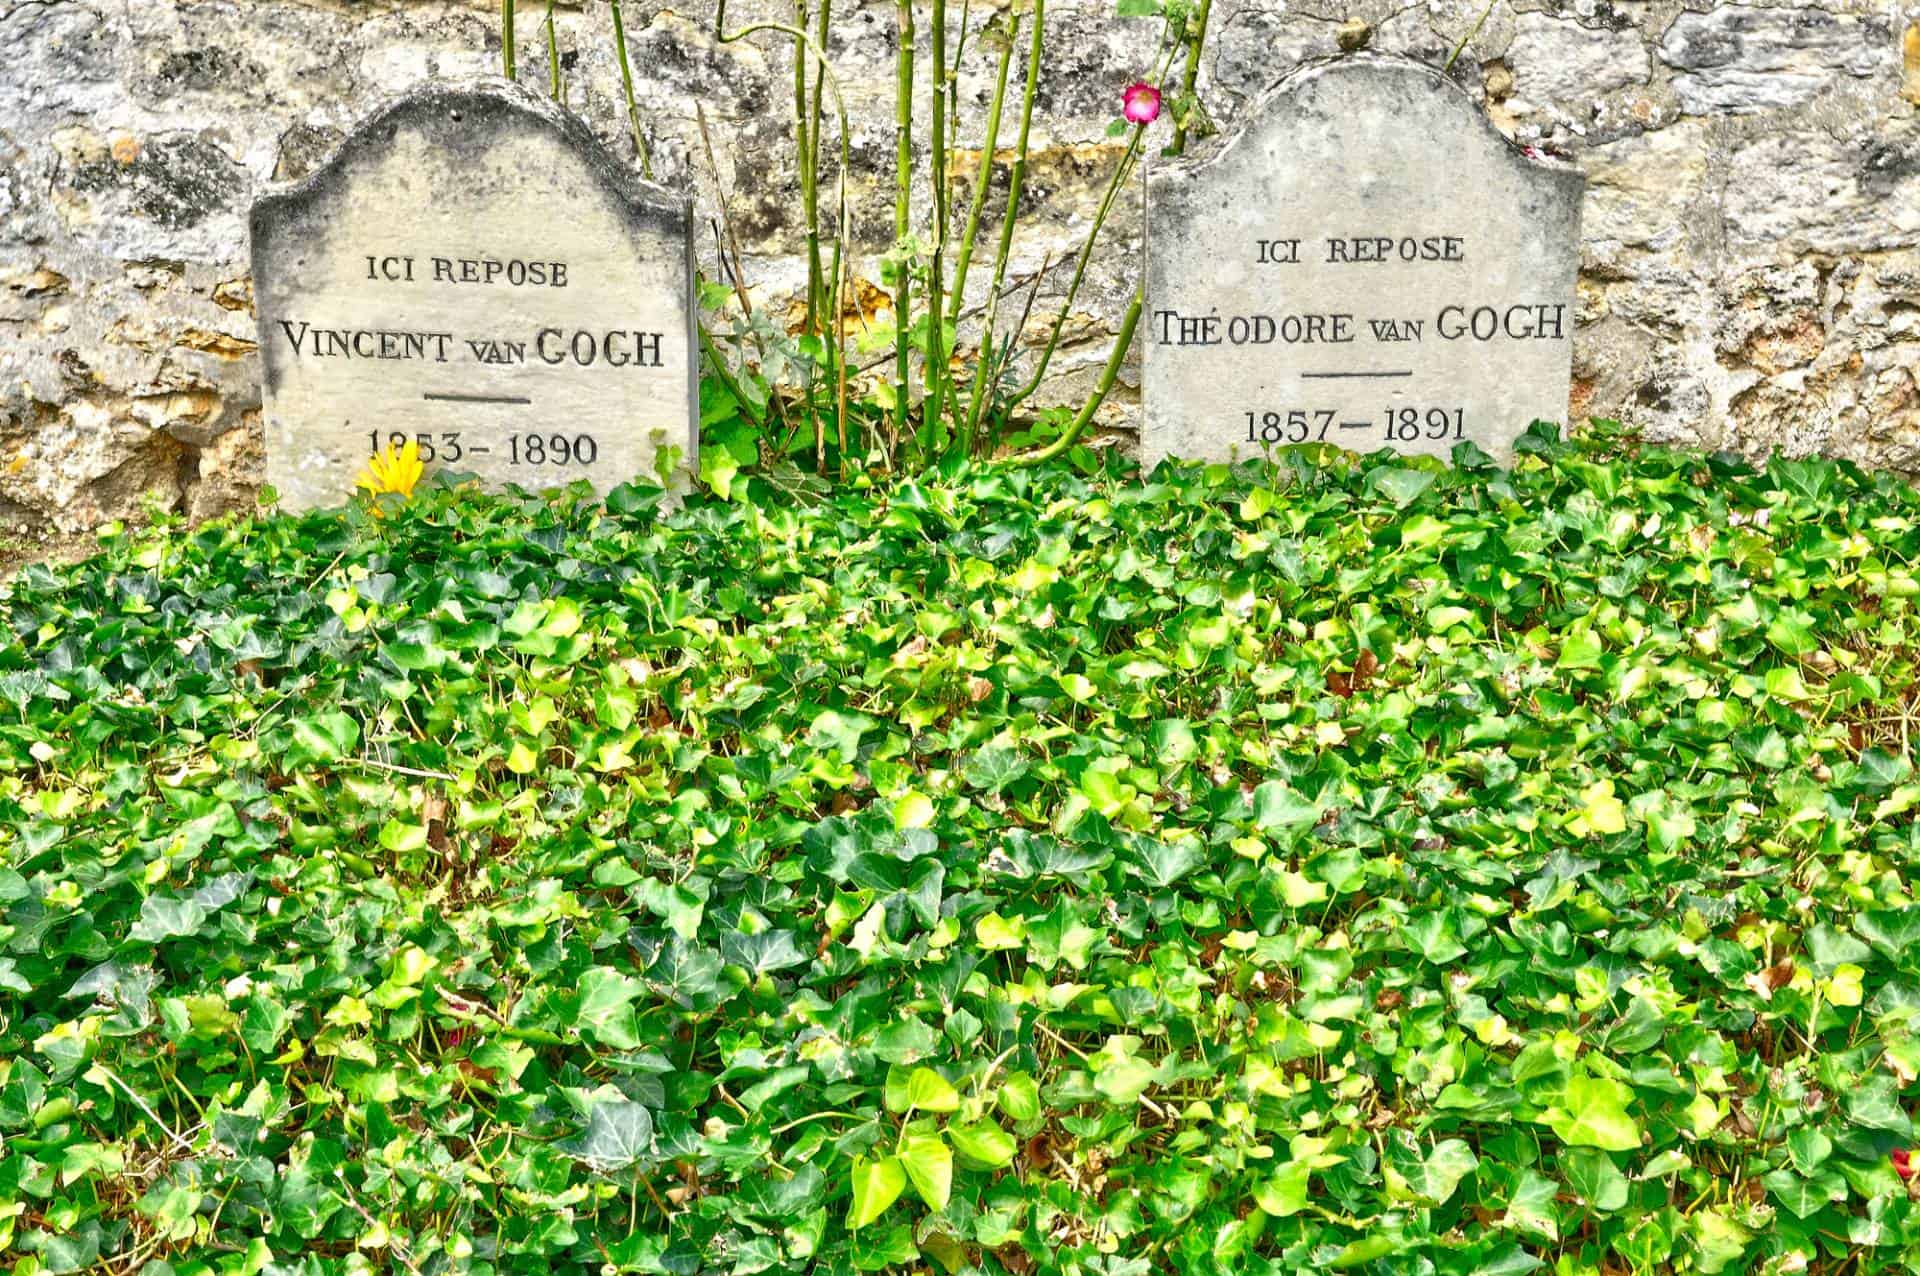 Auvers Cemetery, burial site of Vincent and Theodore Van Gogh, in the picturesque city of Auvers-sur-Oise, France.